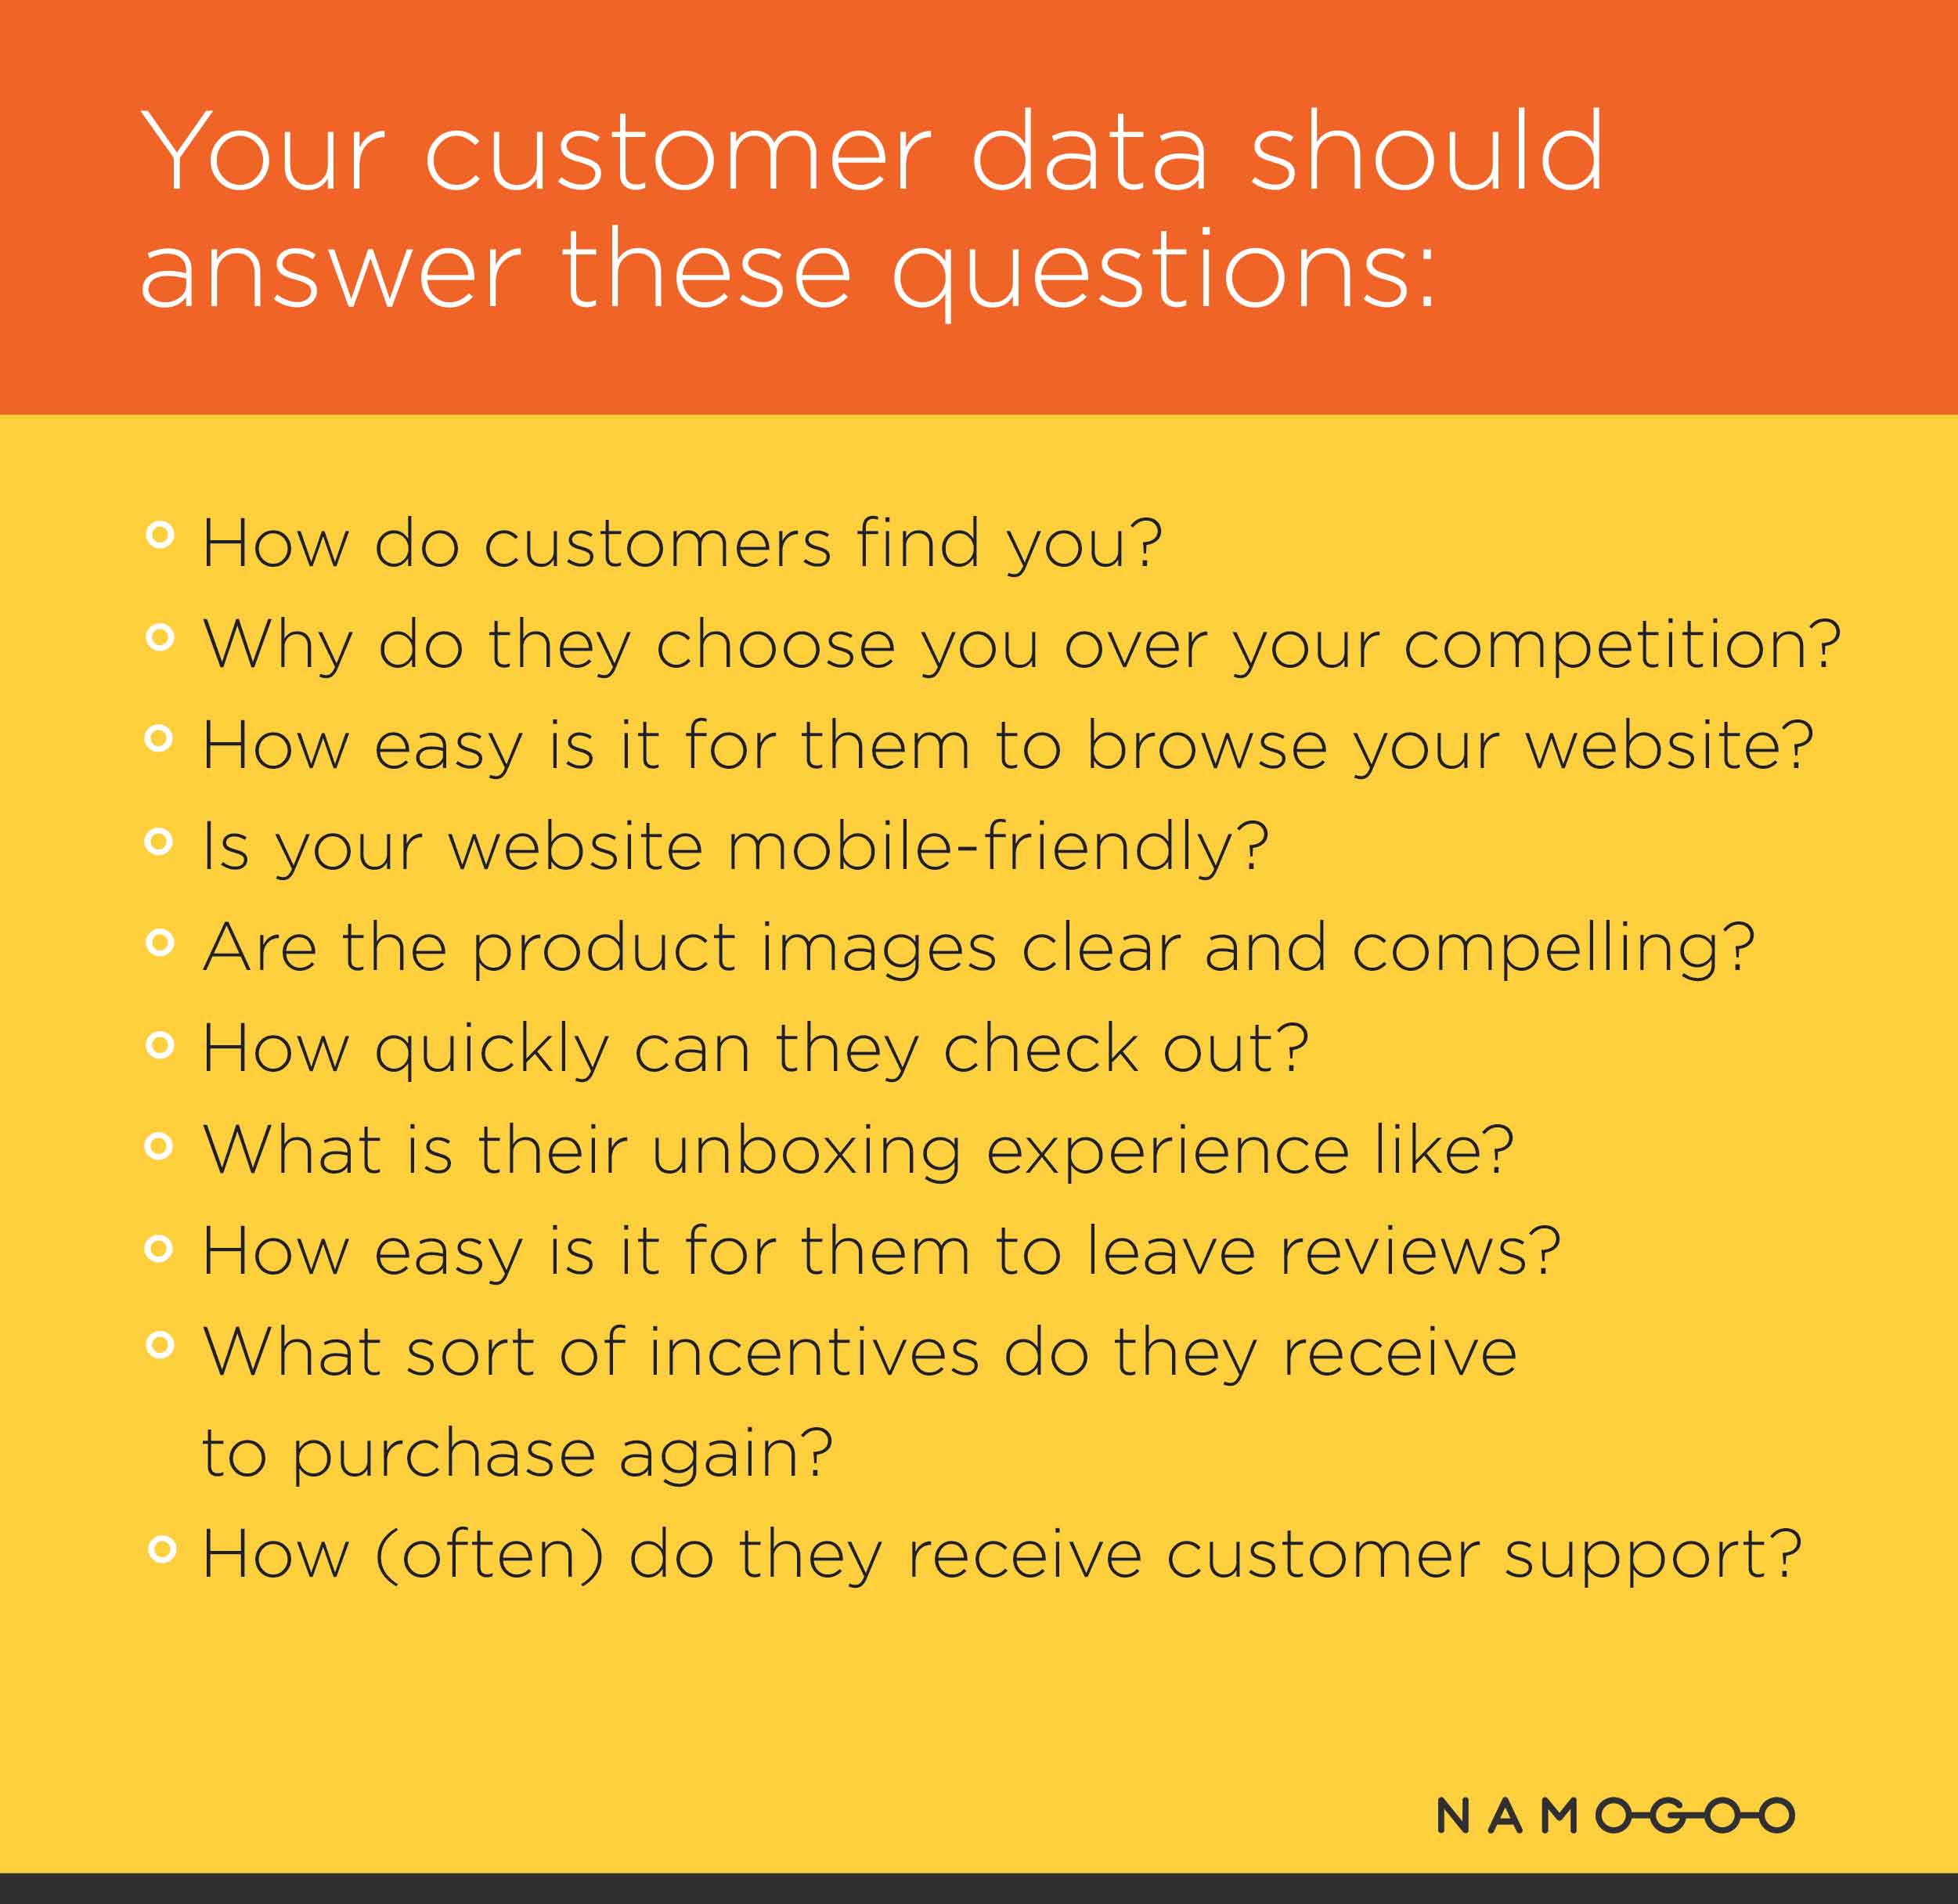 ecommerce customer data should answer these questions